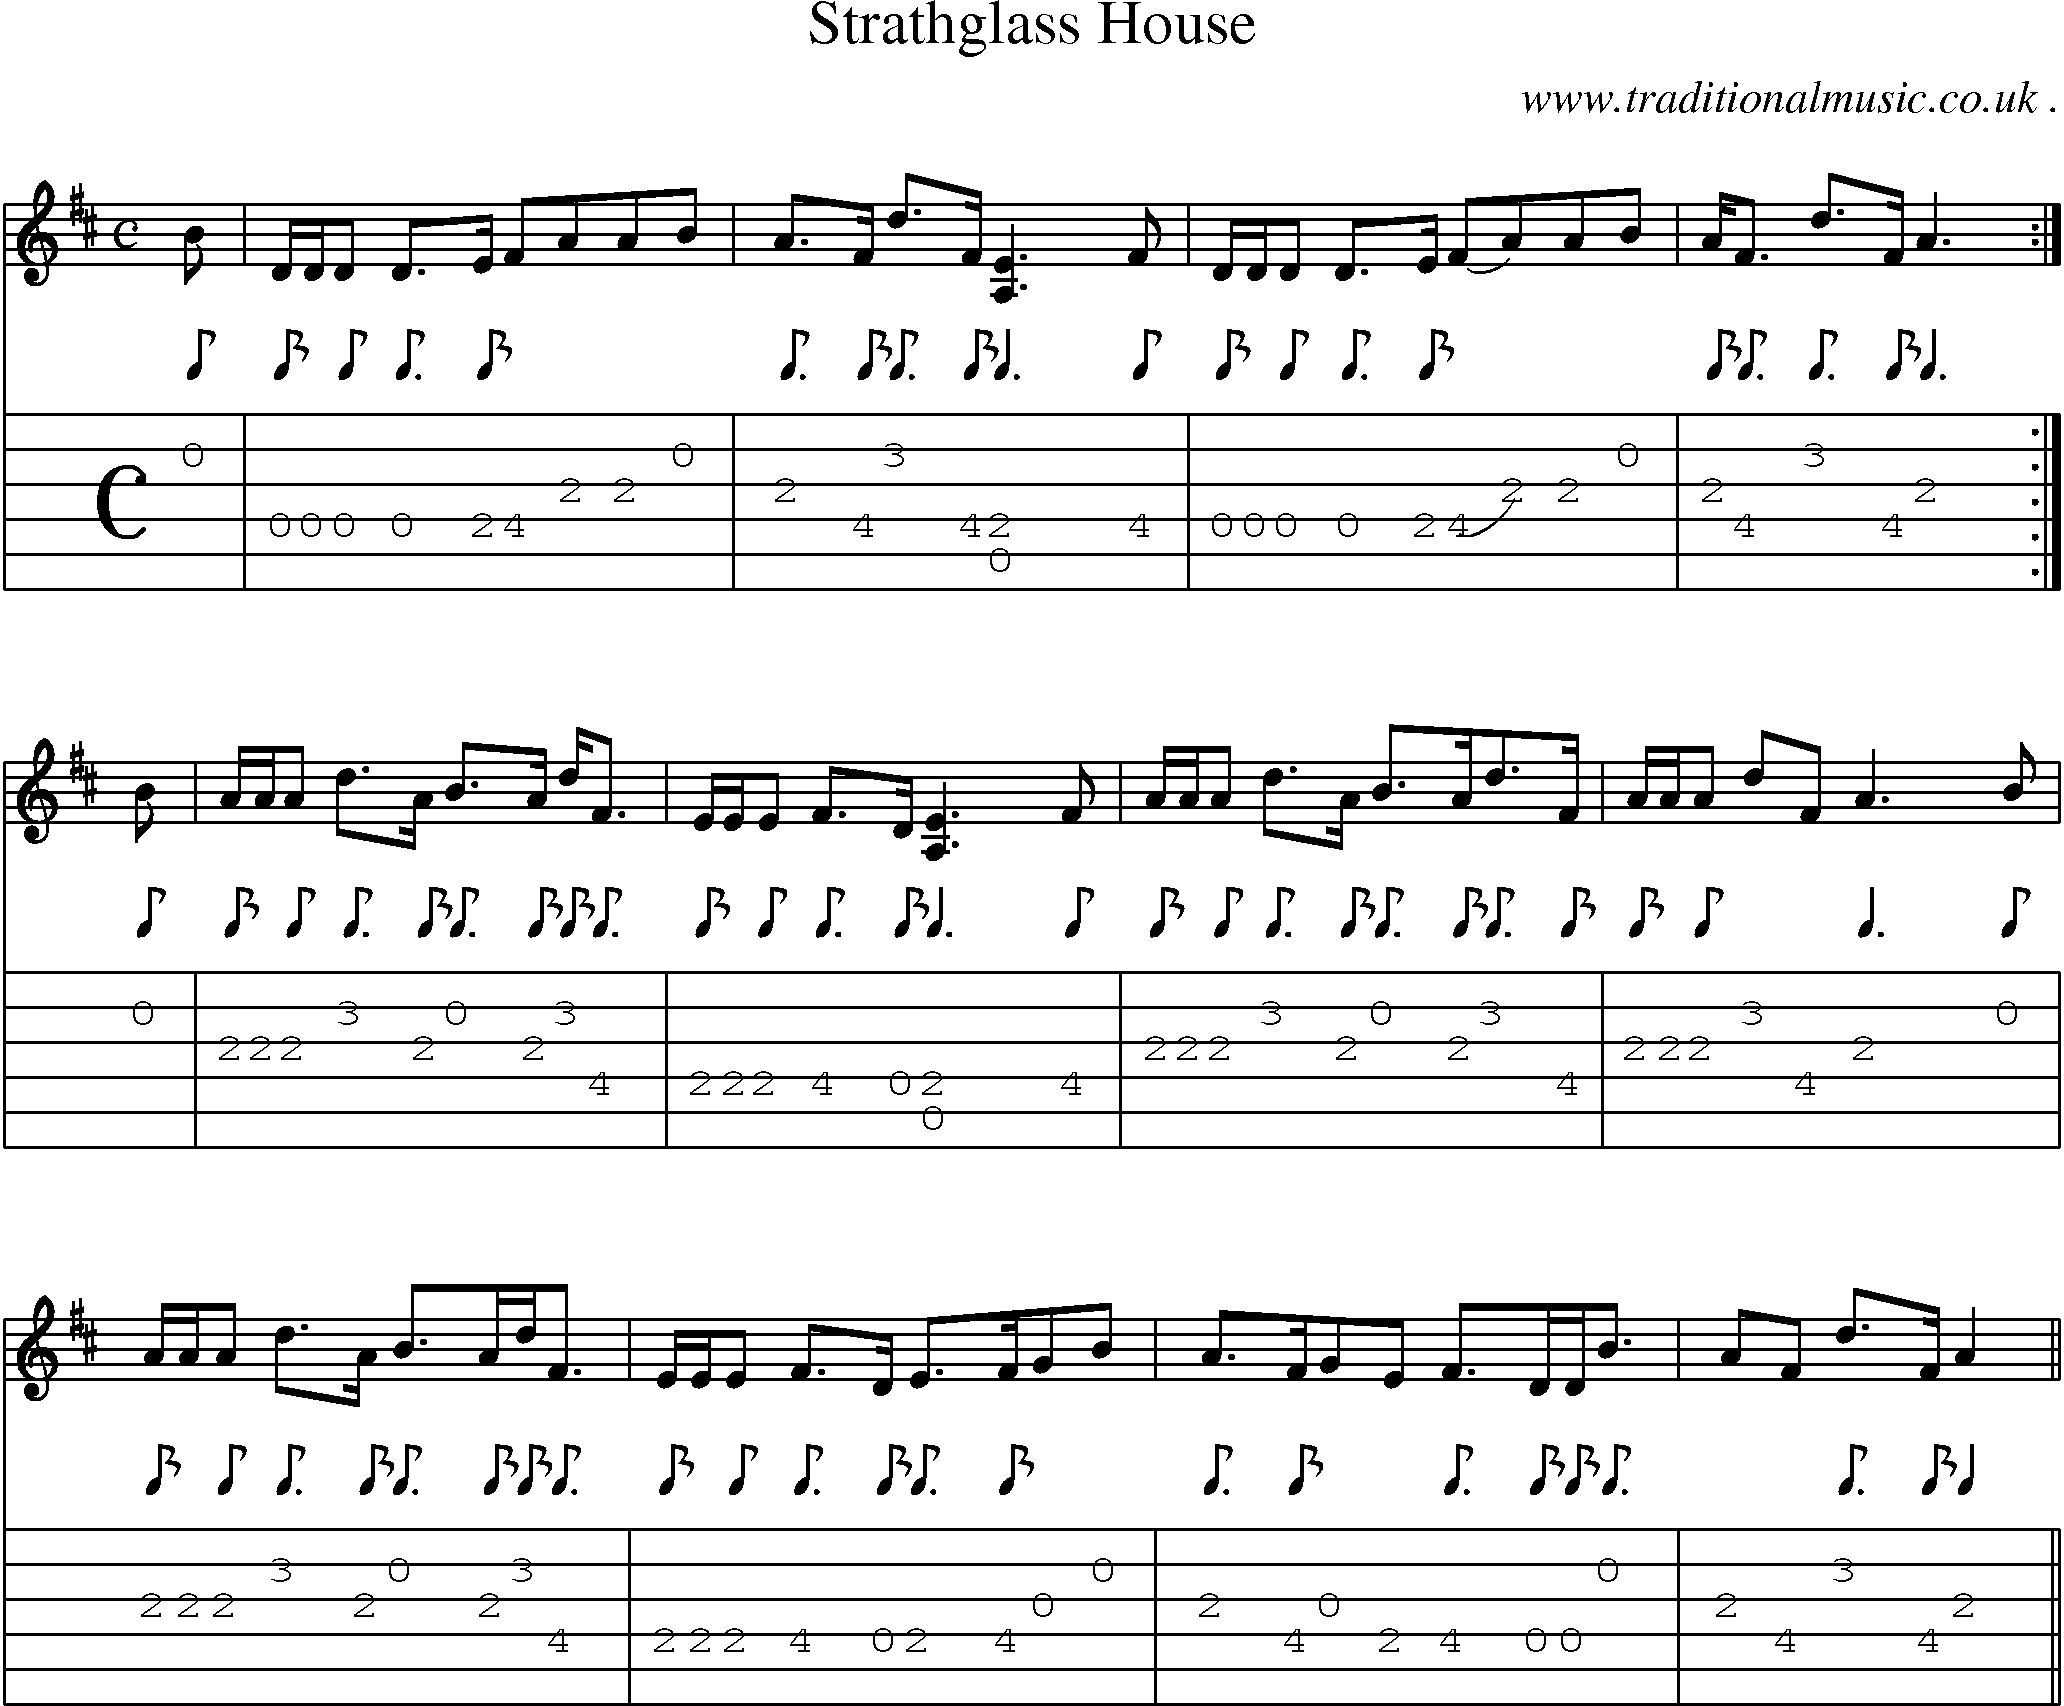 Sheet-music  score, Chords and Guitar Tabs for Strathglass House